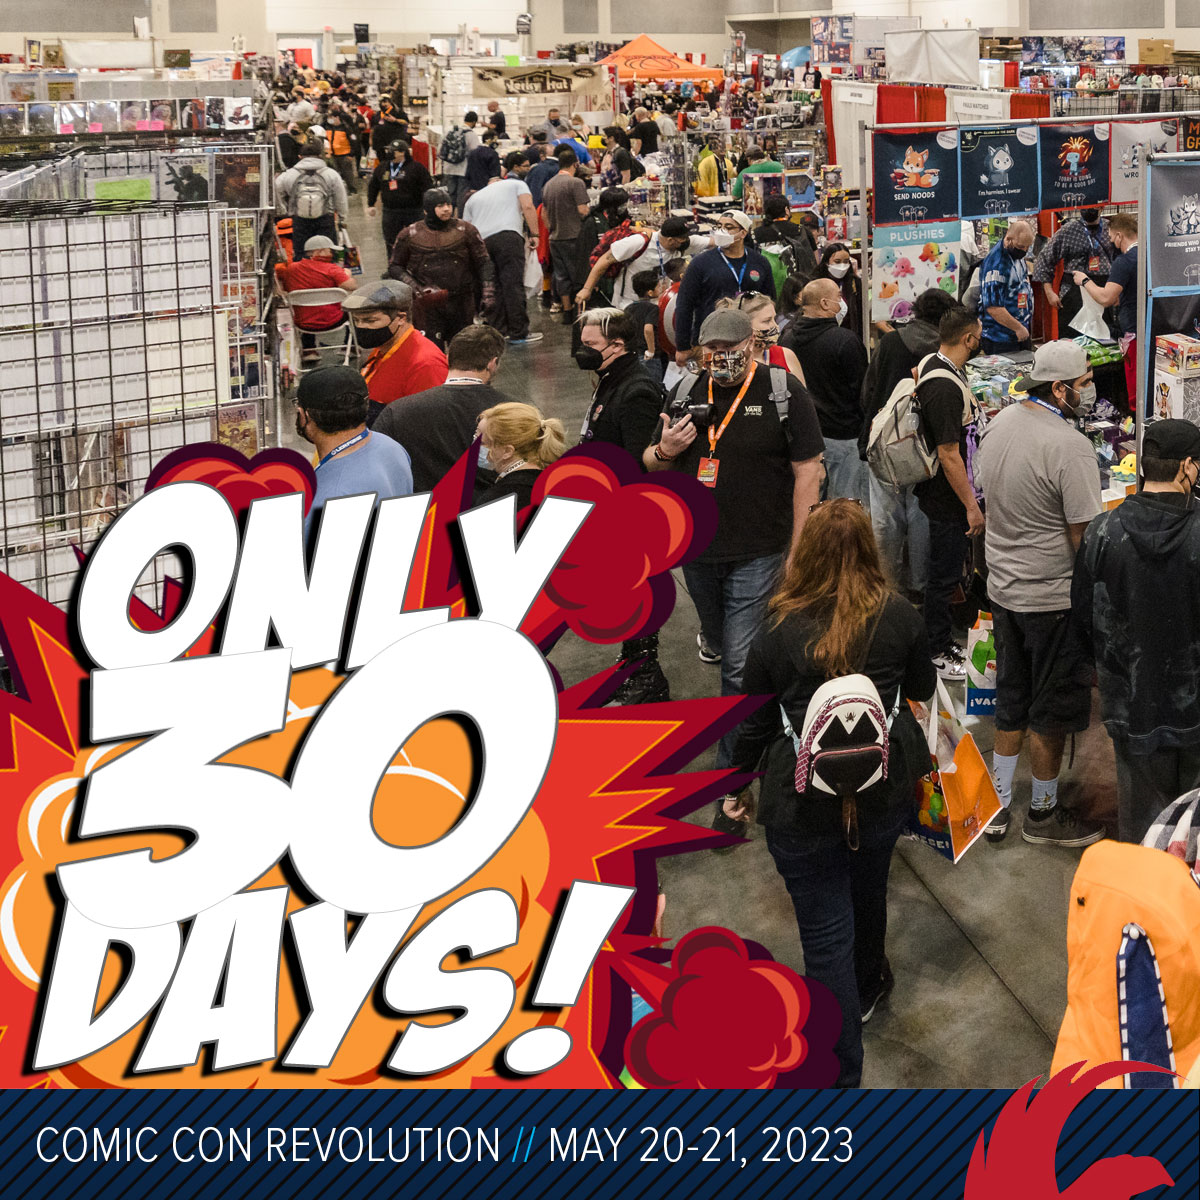 🔥 The countdown is ON! Only 30 more days until #ComicConRevolution is here! You've seen the incredible guest list and massive vendor & creator list so there's no reason to delay - get your tix NOW! Tix: CCRTix.com #comiccon #inlandempire #ontariocalifornia #socal